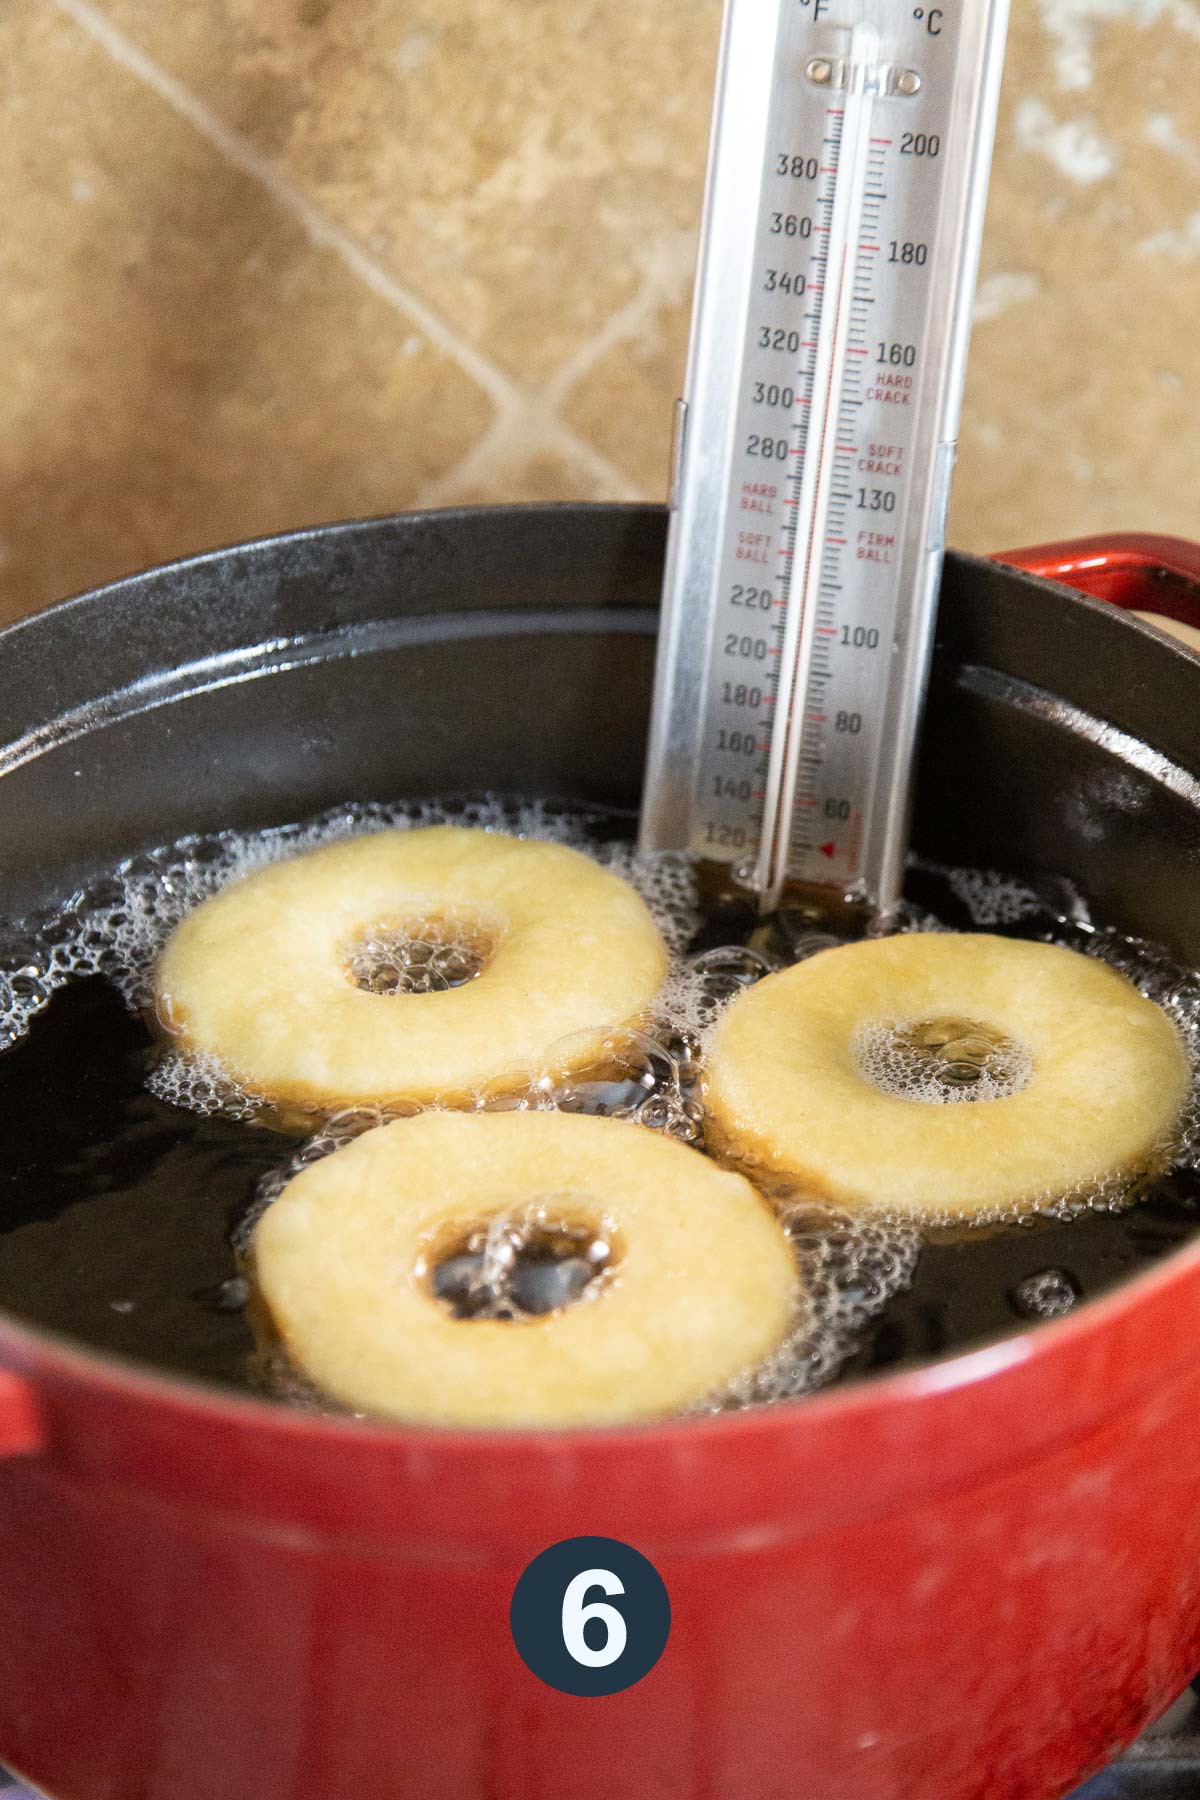 fry three doughnuts at time in hot oil maintained with thermometer.